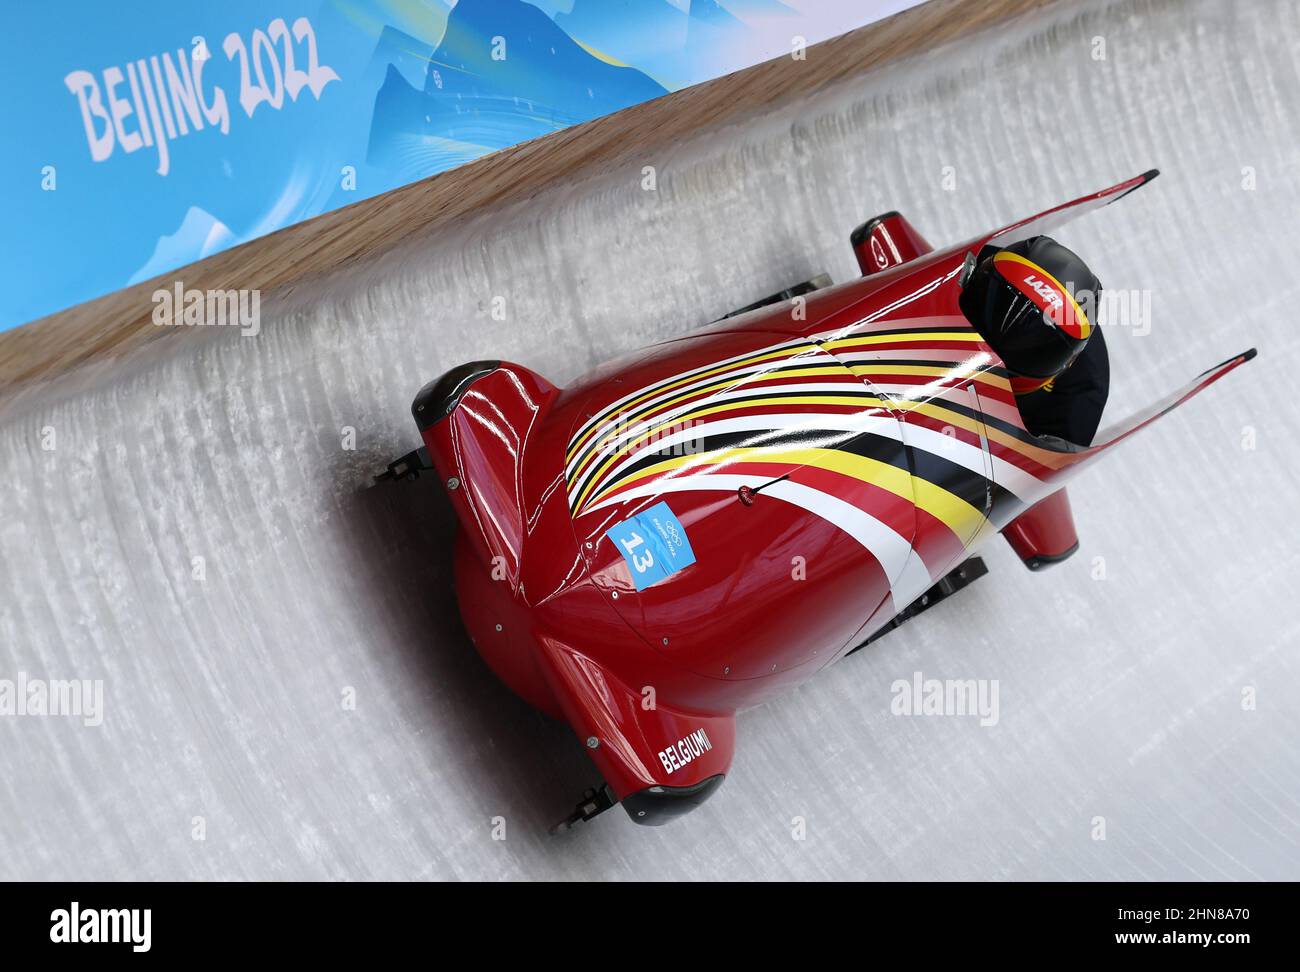 2022 Beijing Olympics - Bobsleigh - 2-woman Official Training - National Sliding Centre, Beijing, China - February 15, 2022. An Vannieuwenhuyse of Belgium and teammate in action. REUTERS/Edgar Su Stock Photo